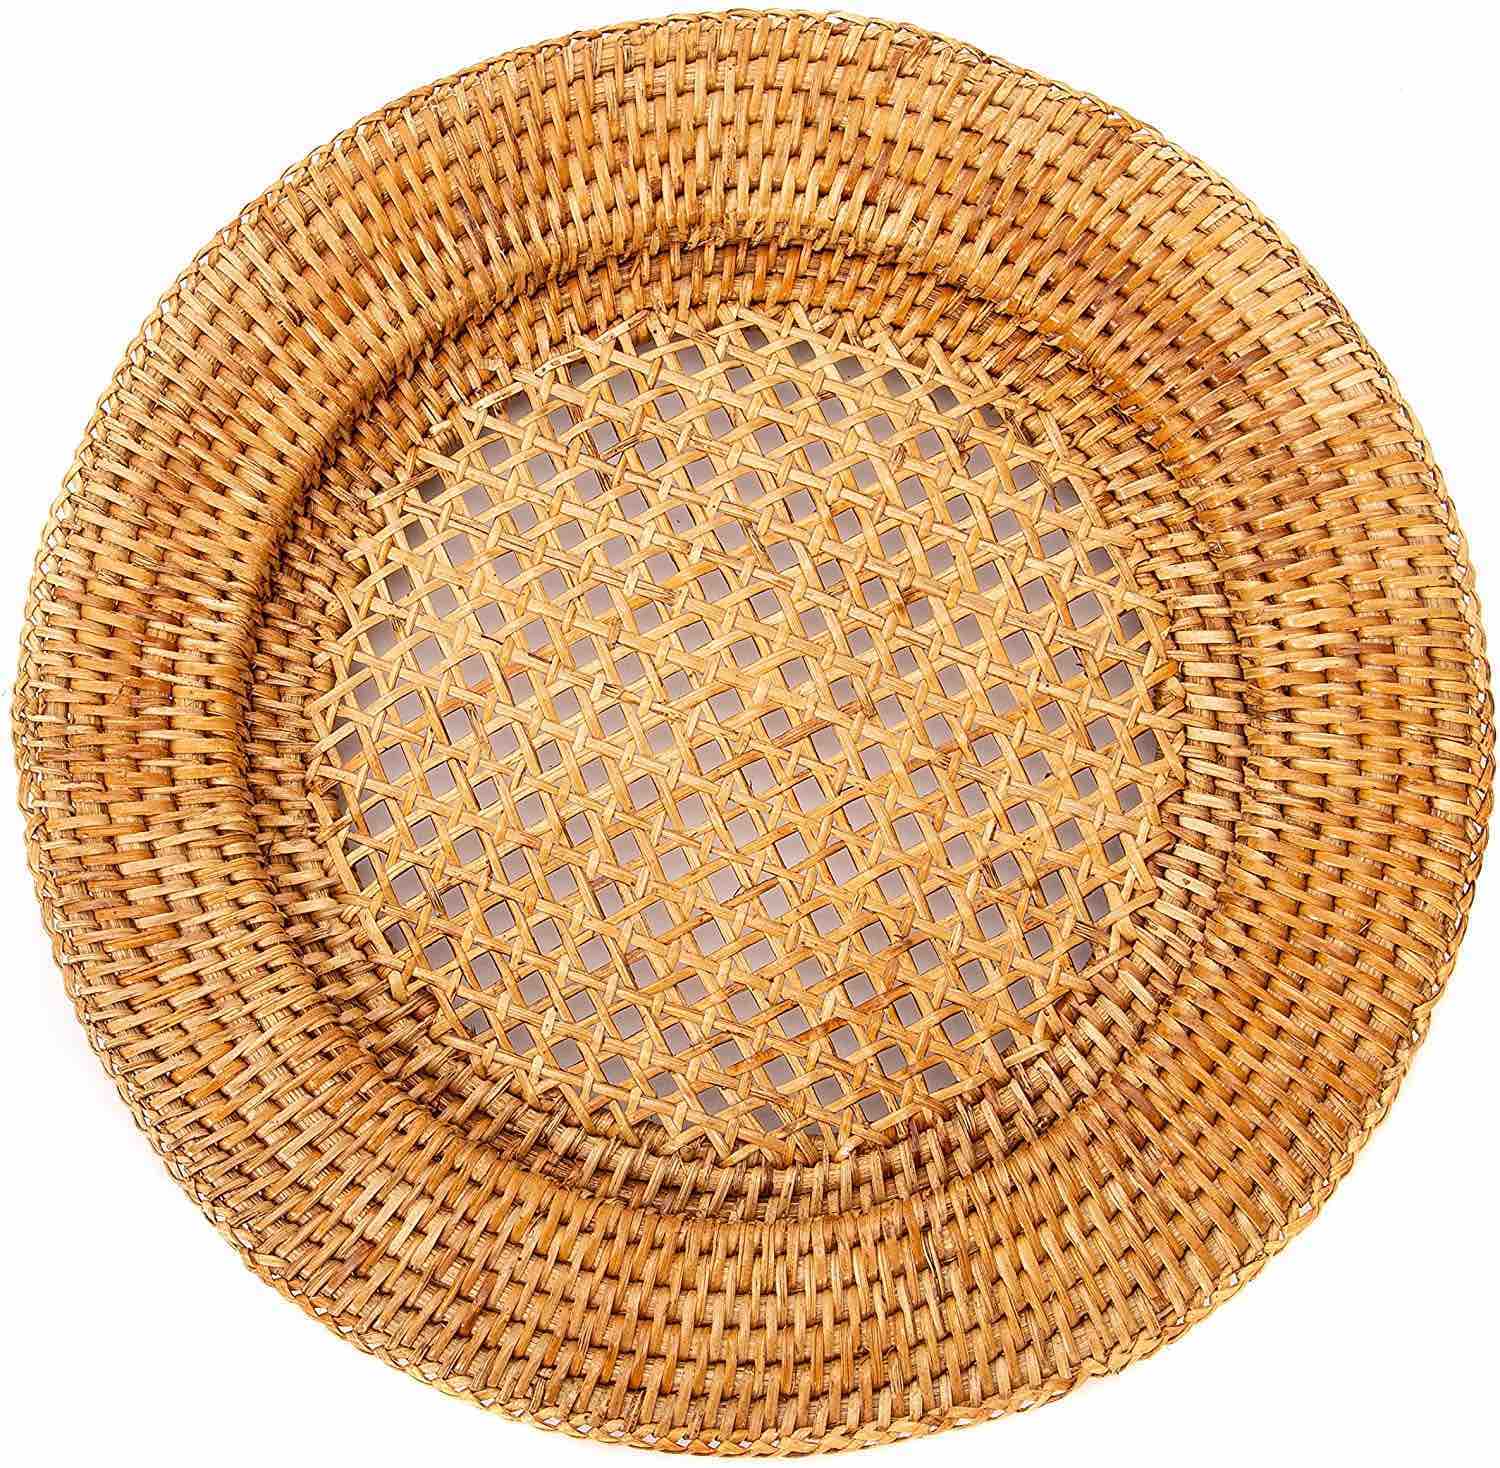 Woven Rattan Charge PC273119